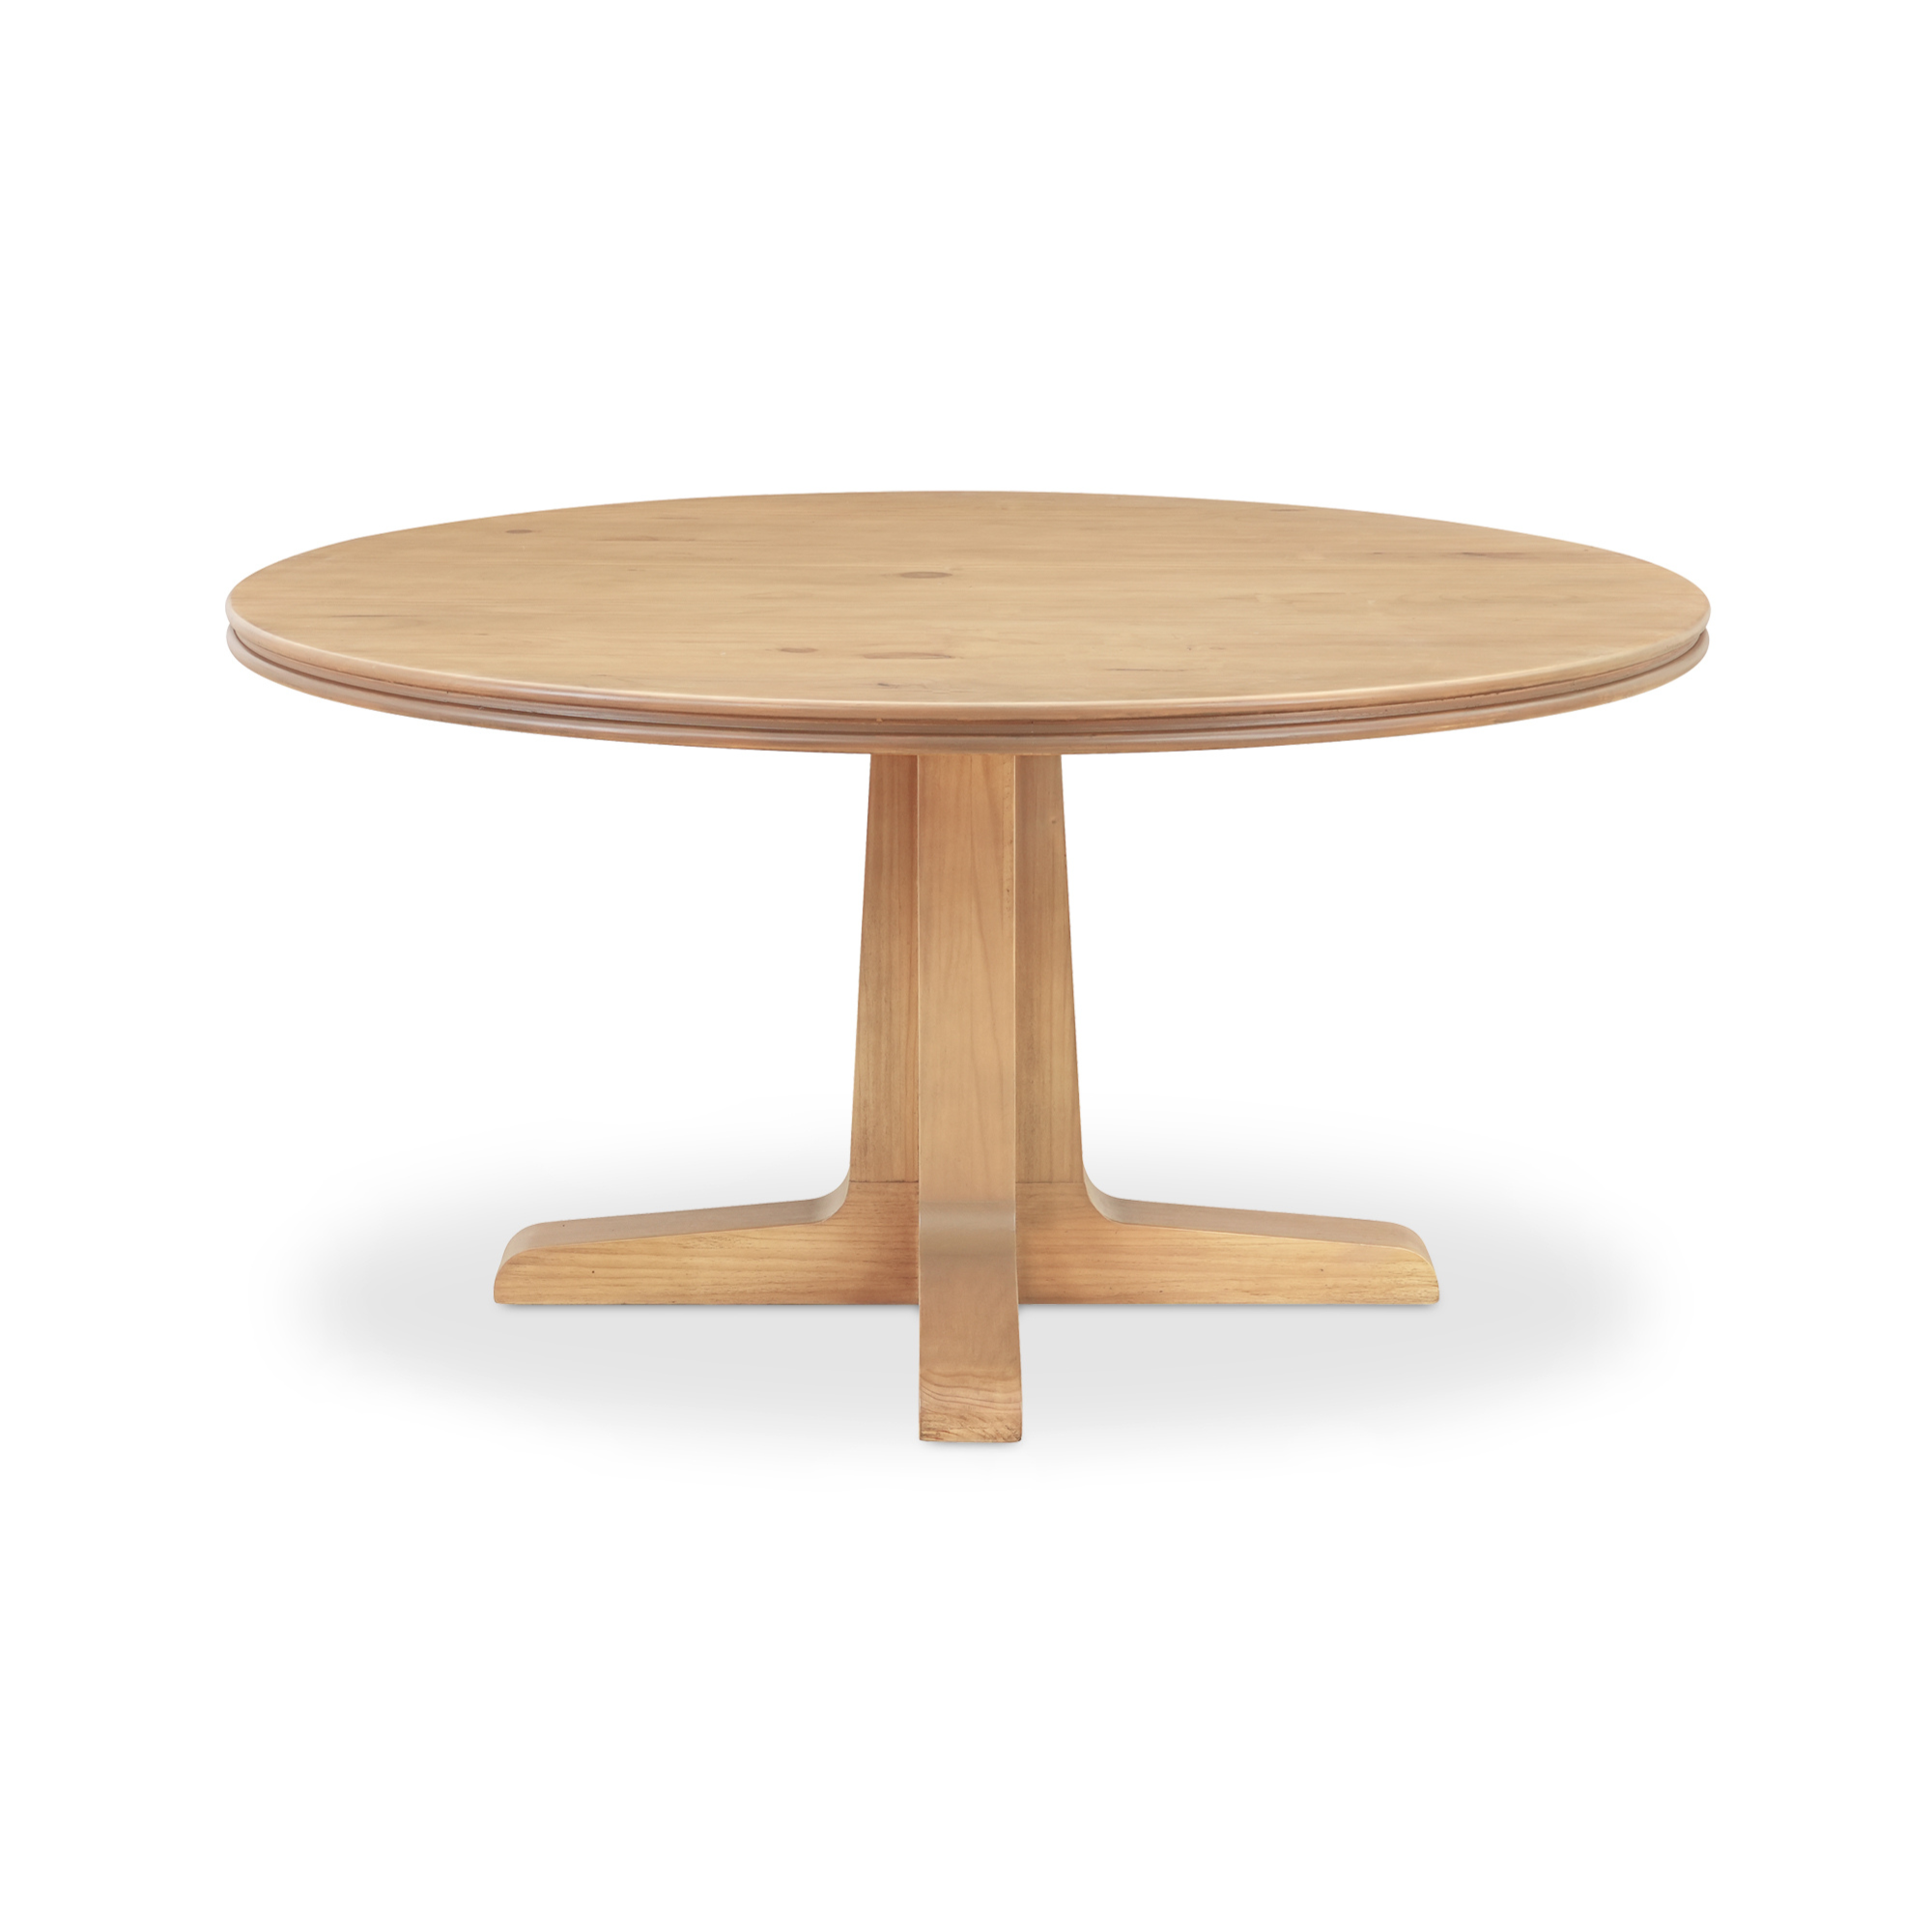 Pico Dining Table